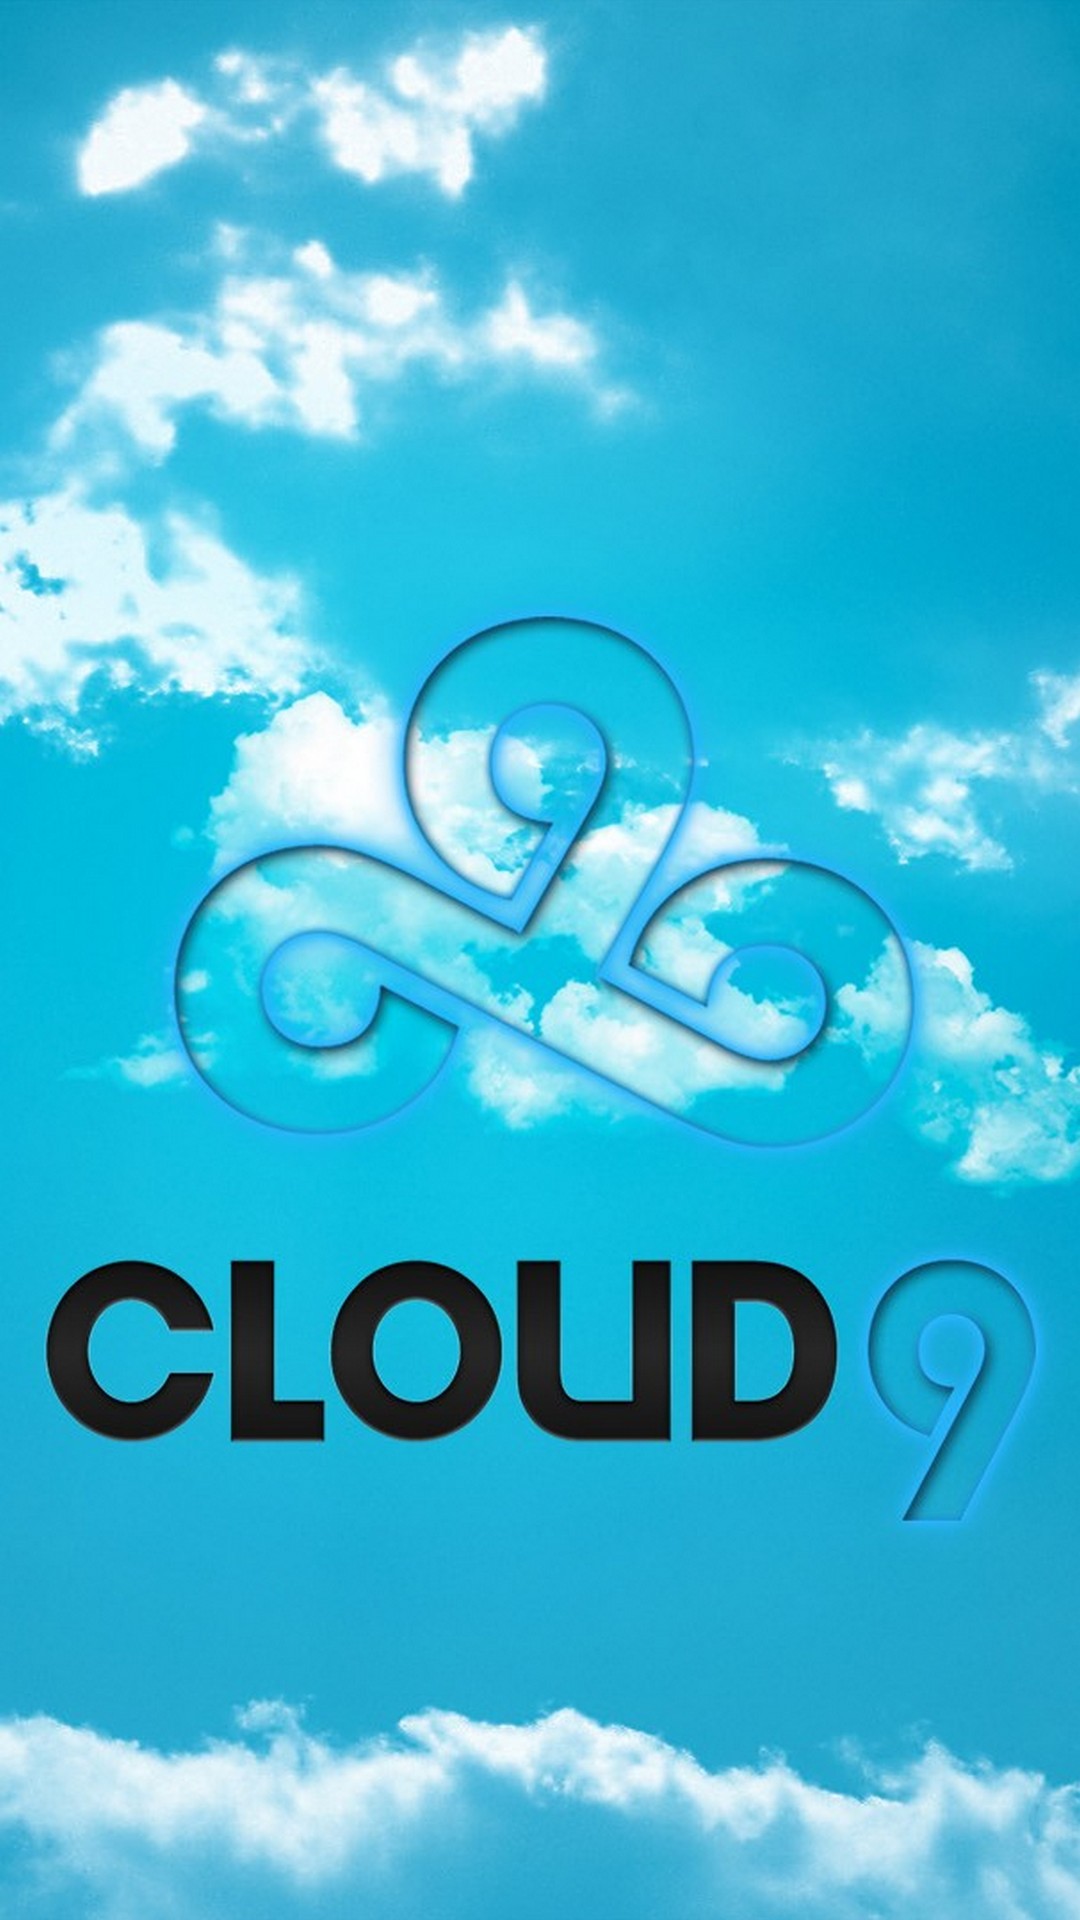 Cloud 9 Games Wallpaper For iPhone resolution 1080x1920